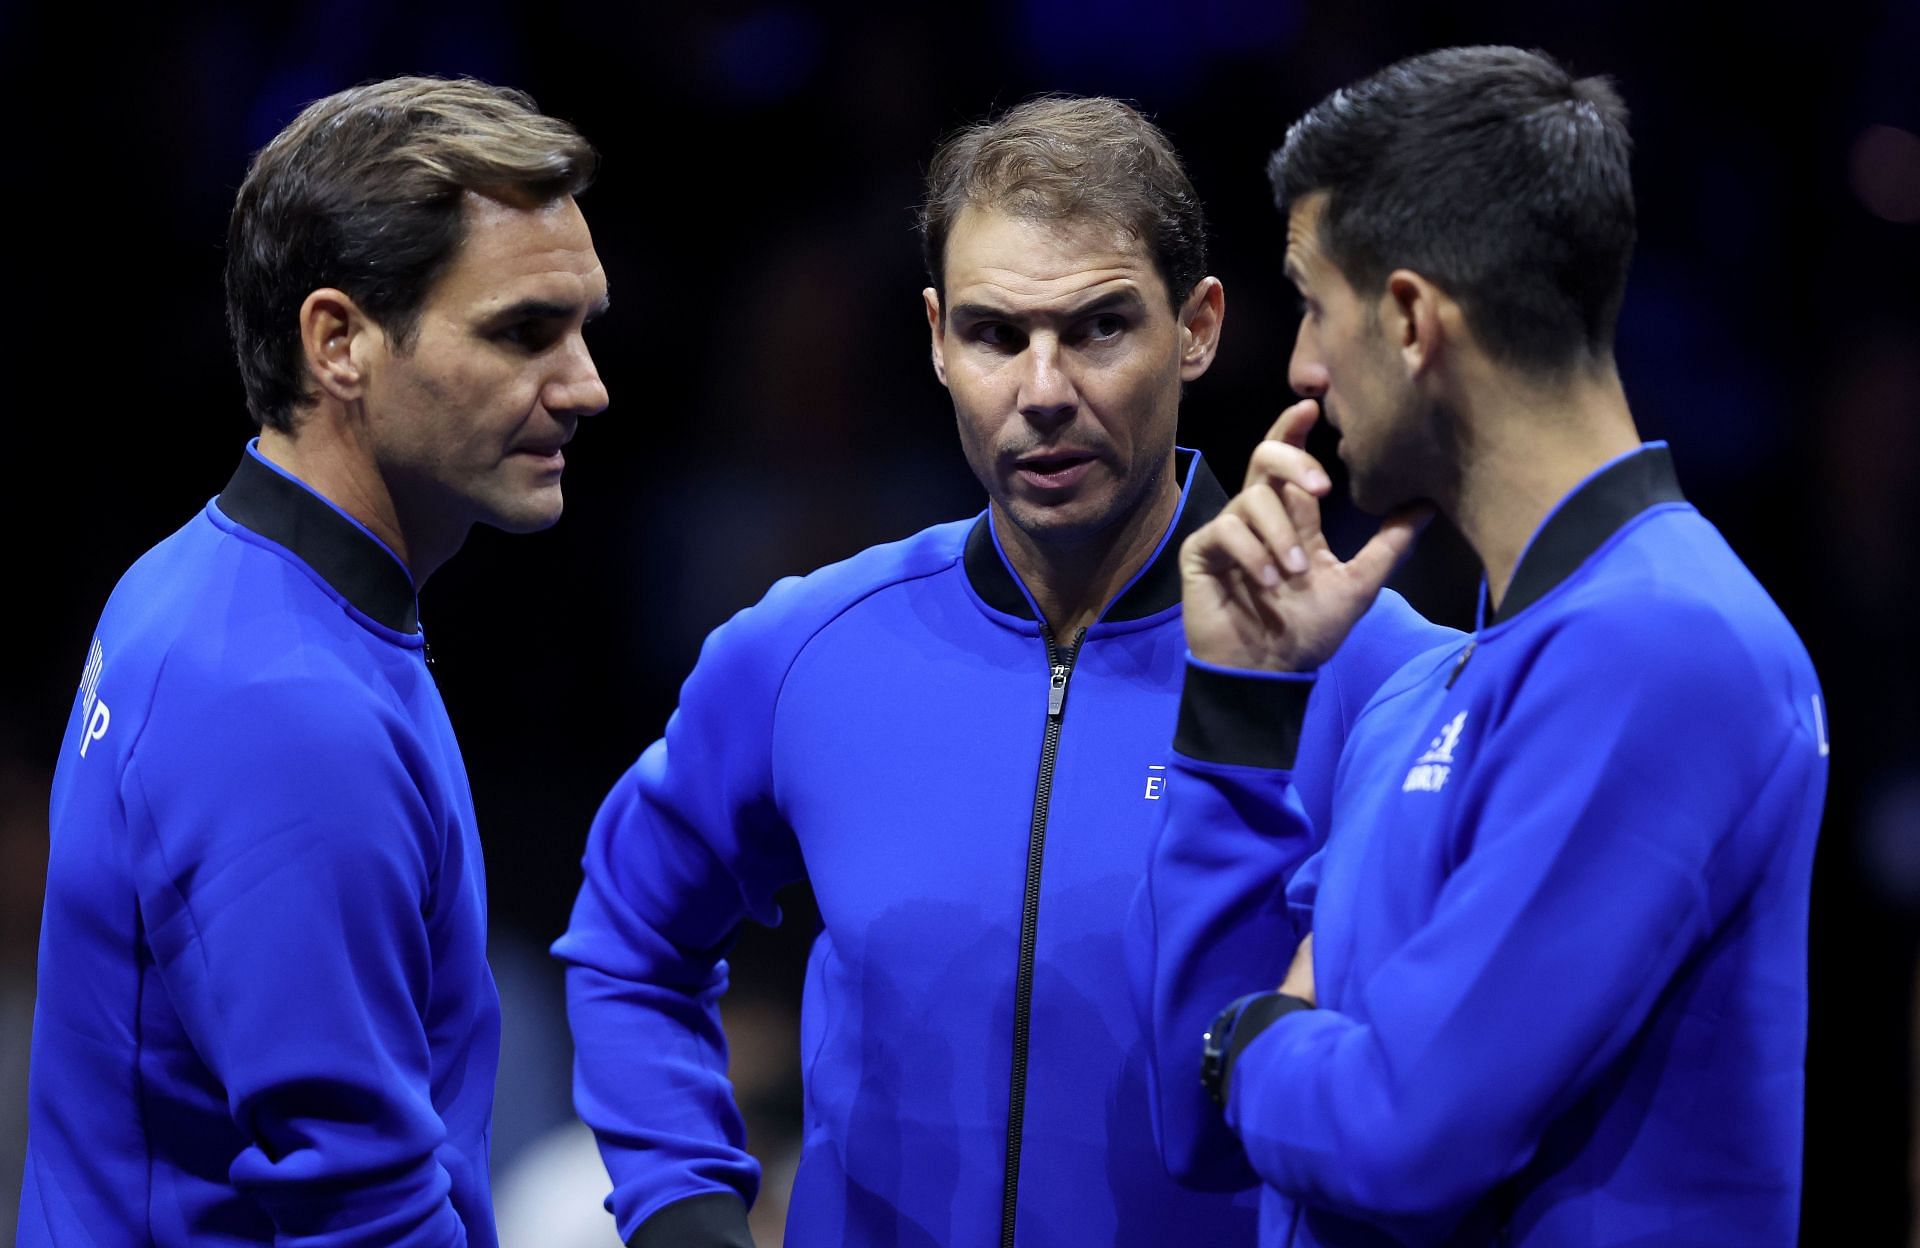 The Big-3 at Laver Cup 2022